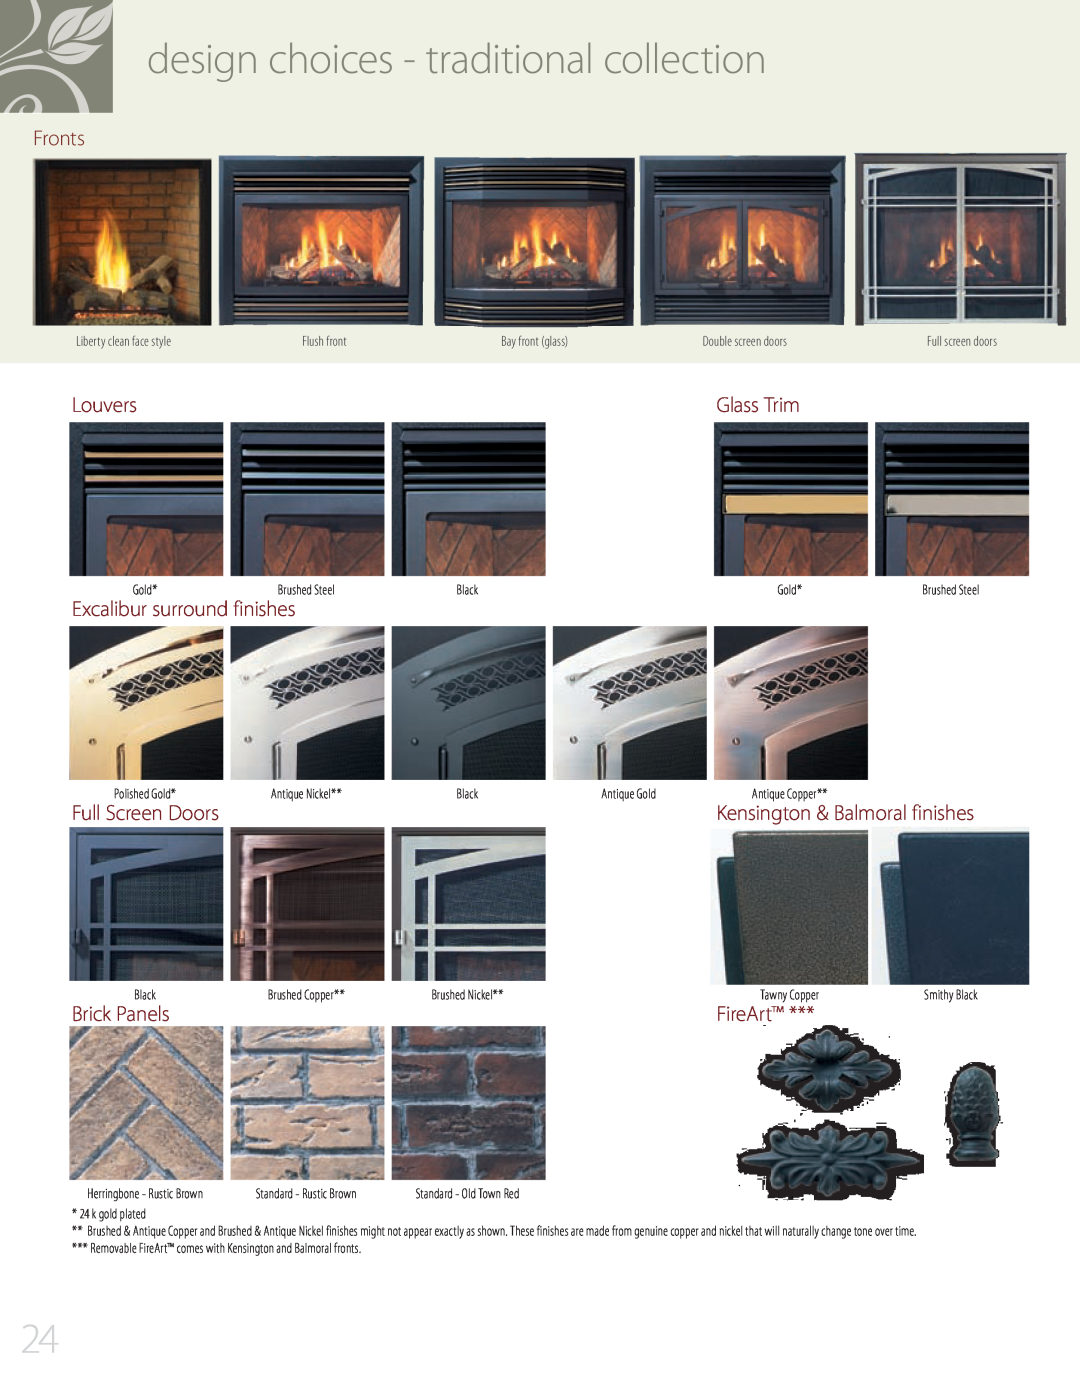 Regency P33S design choices - traditional collection, Fronts, Louvers, Excalibur surround finishes, Brick Panels, FireArt 